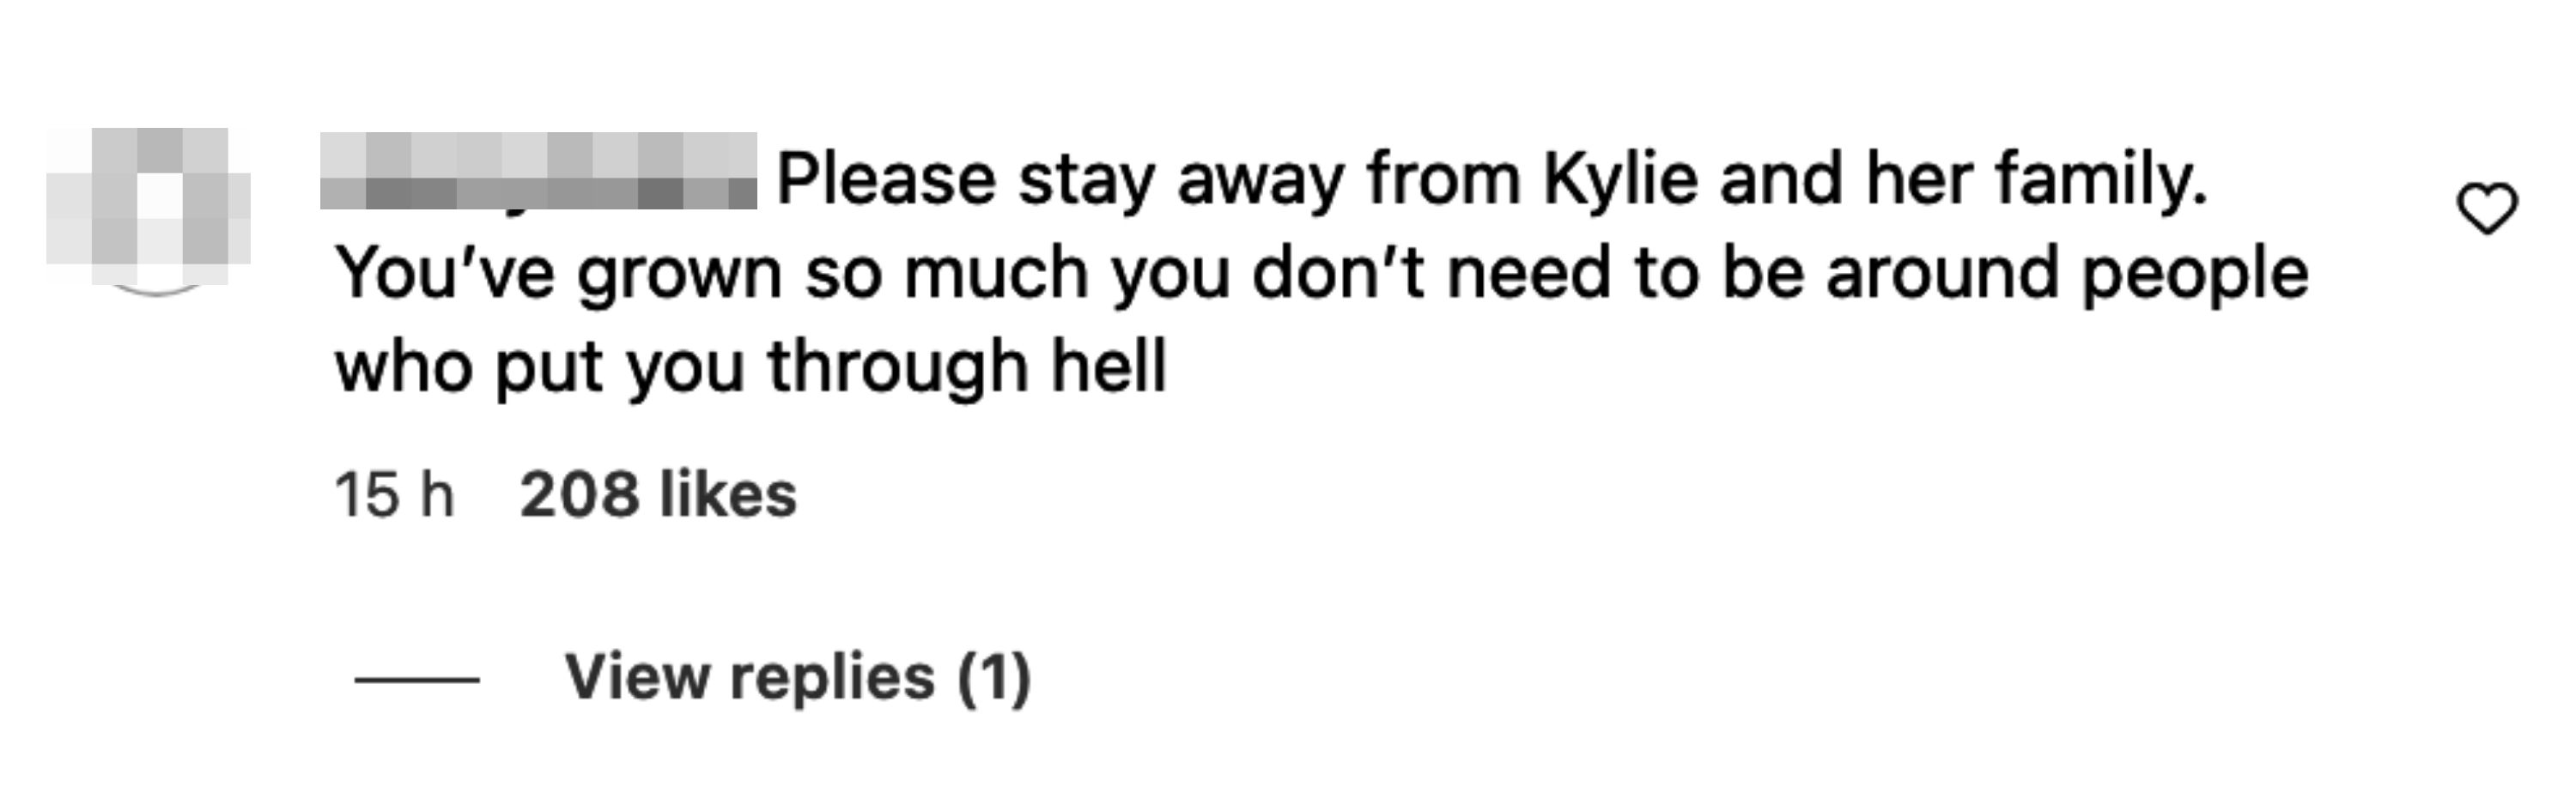 &quot;Please stay away from Kylie and her family.&quot;